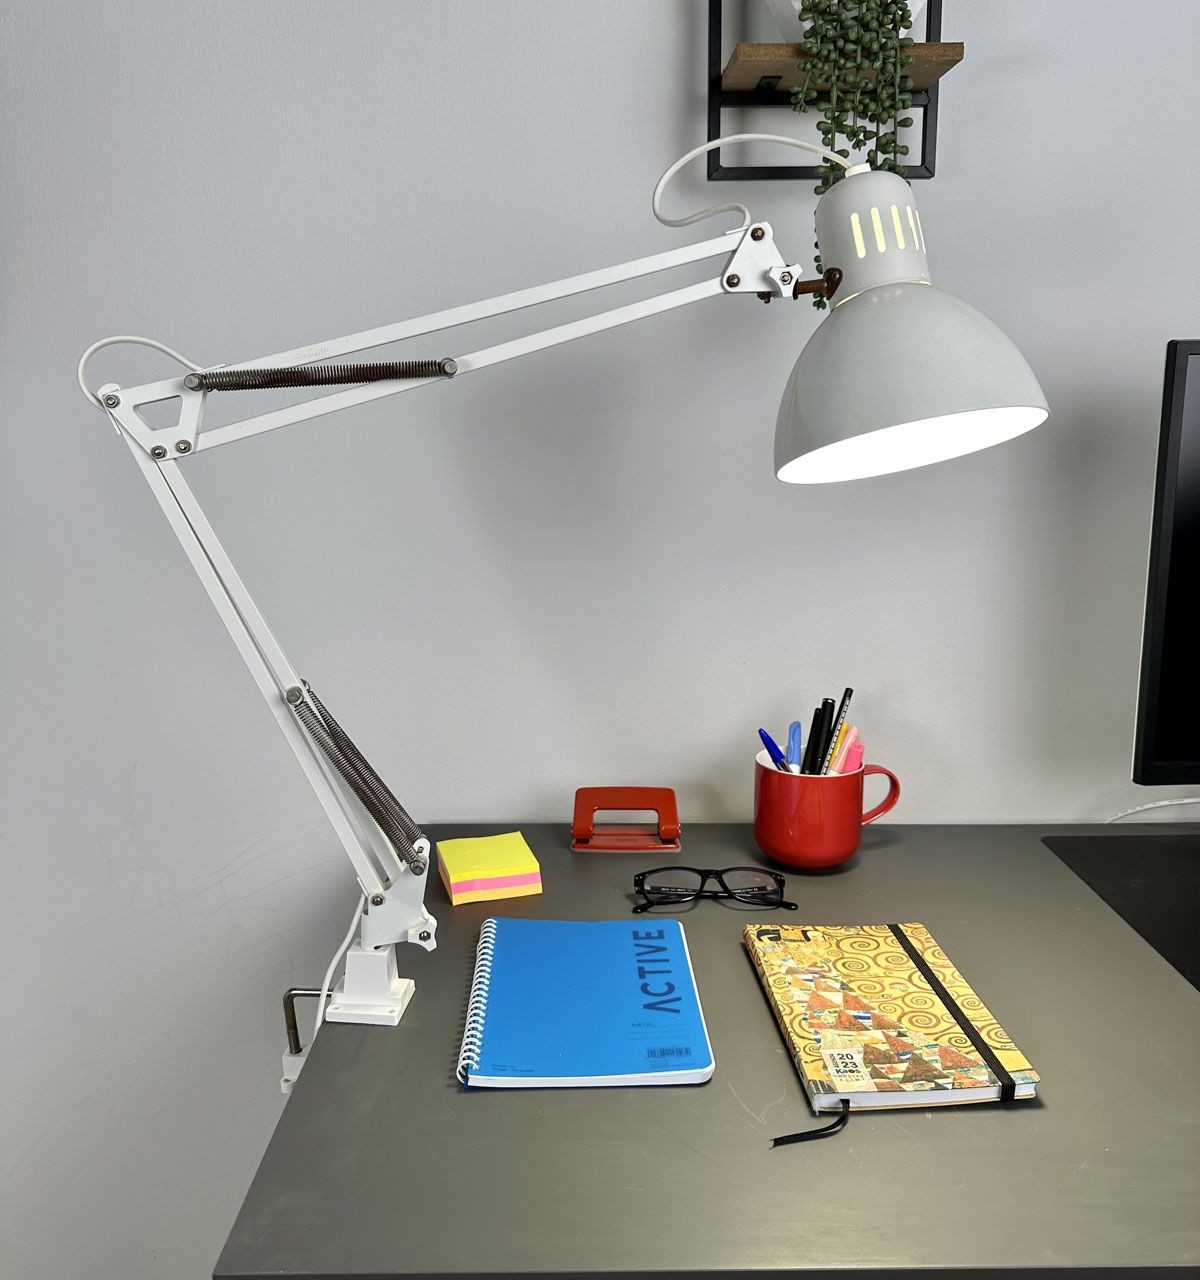 Use a Clamp to Optimize Desk Space